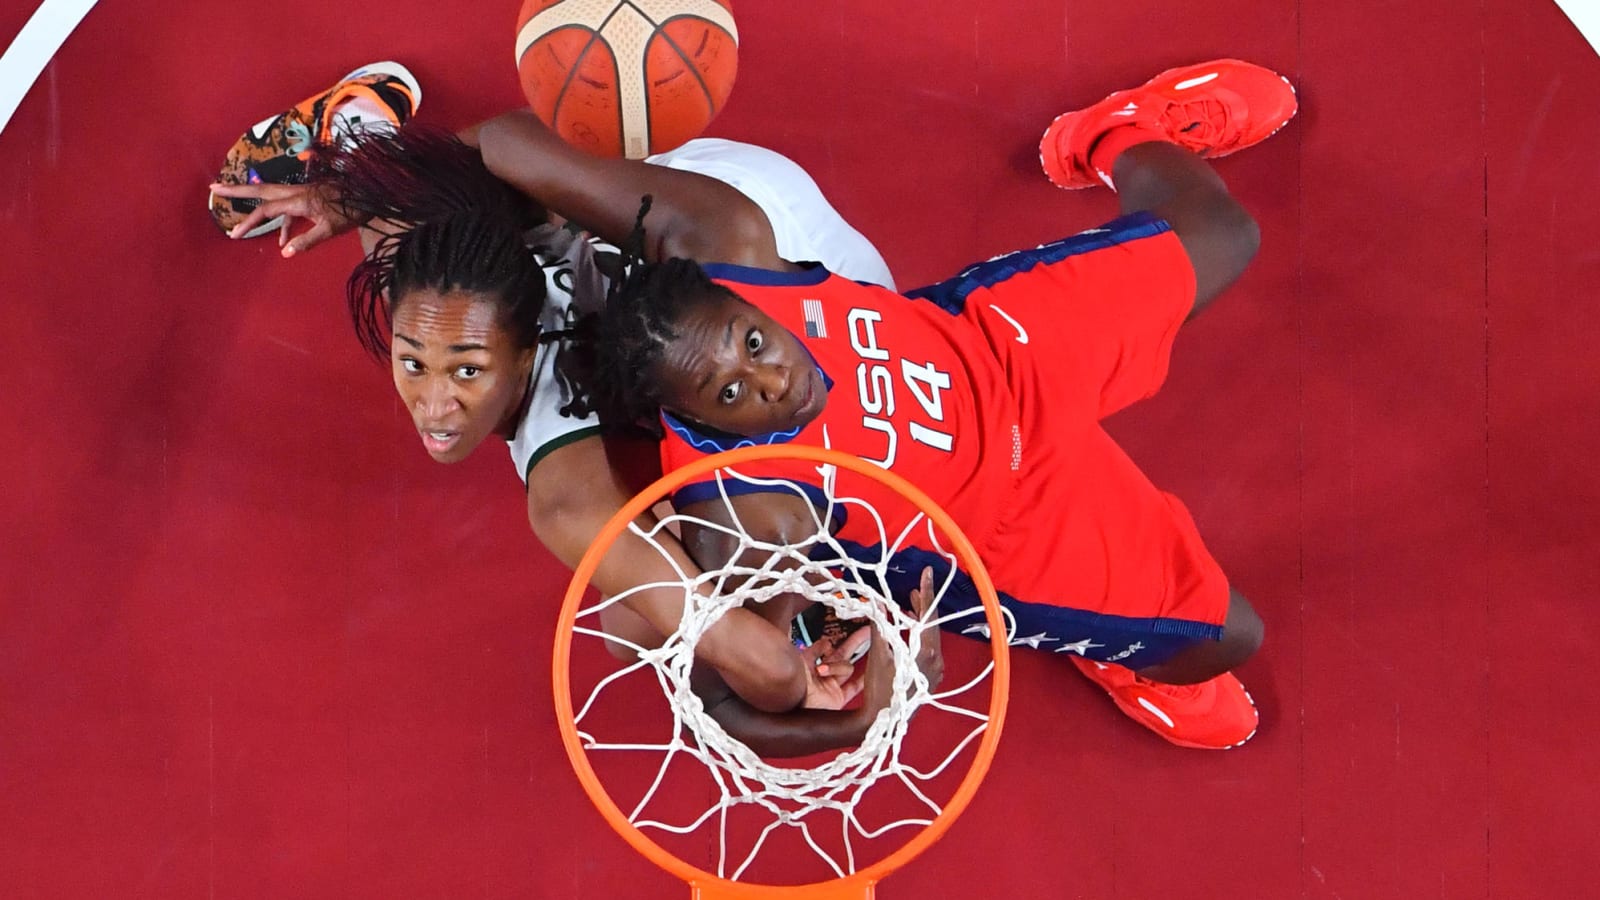 Mercury sign All-Star Tina Charles to one-year deal